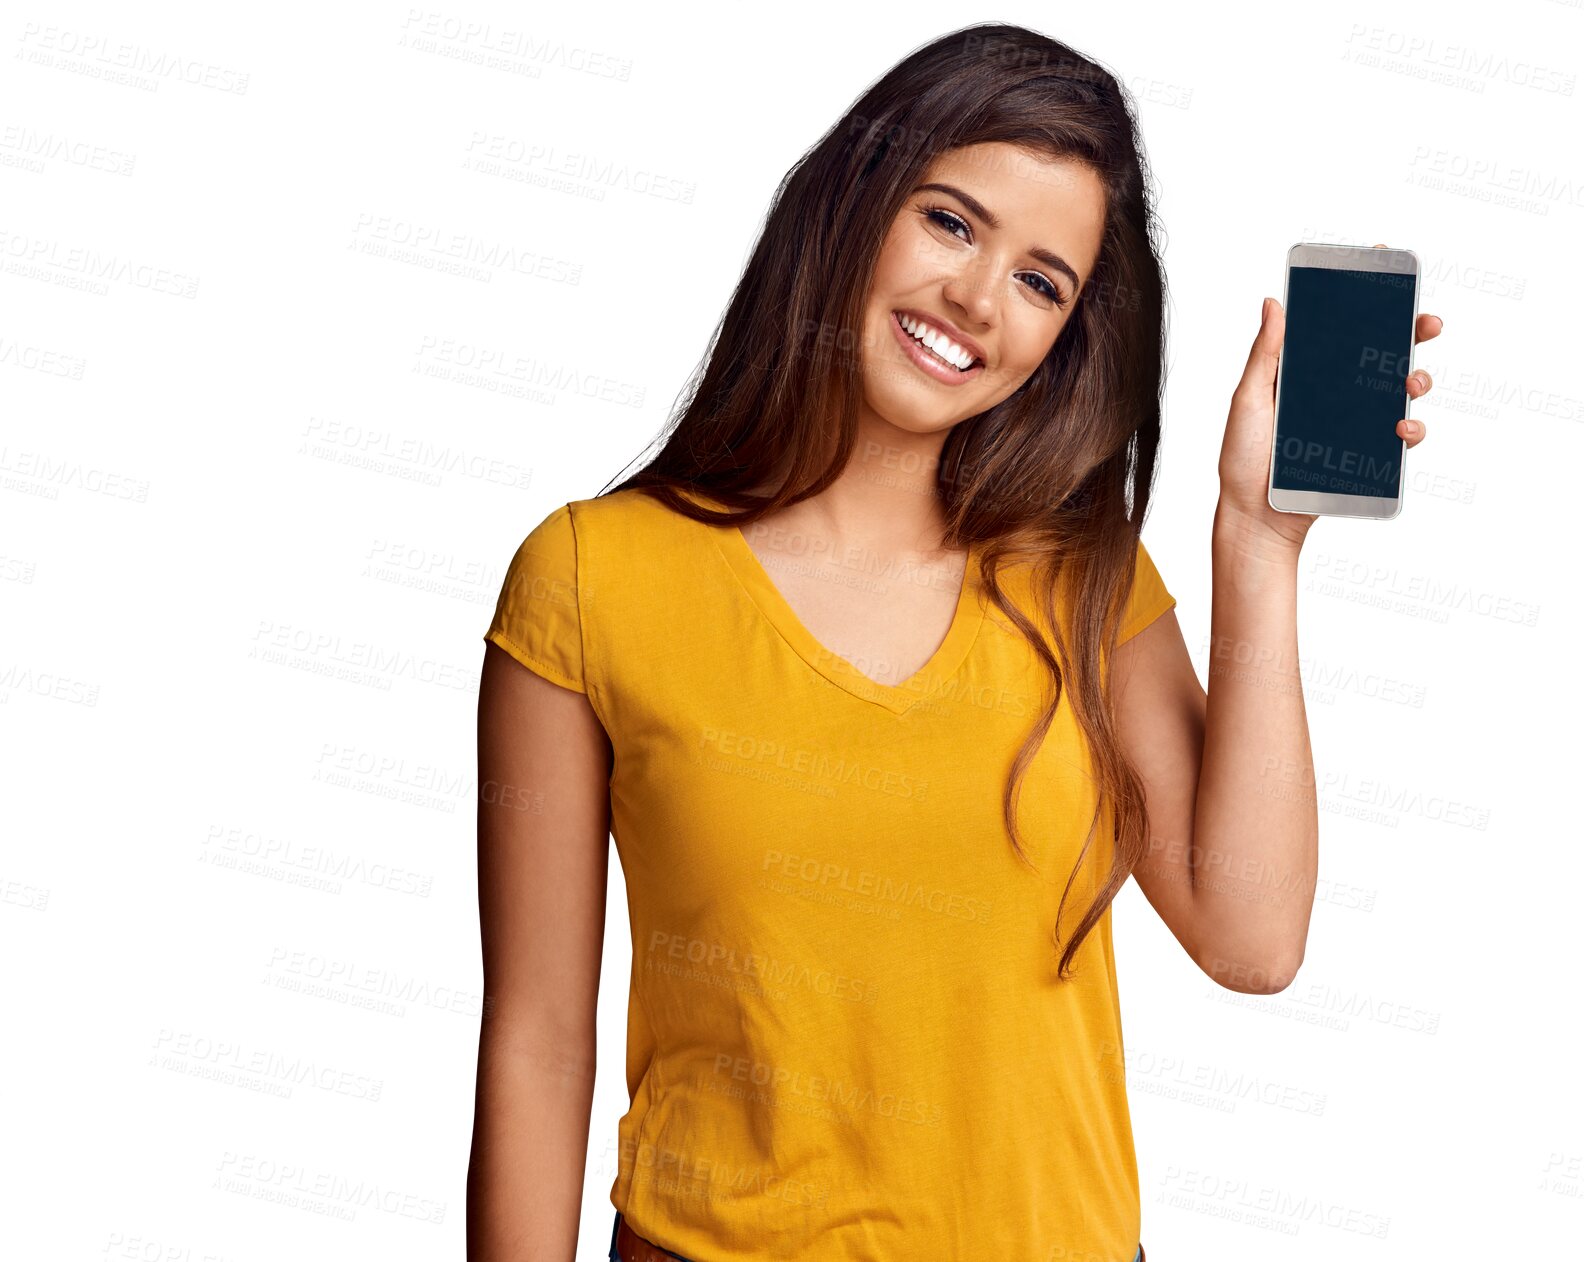 Buy stock photo Portrait, woman and screen of phone with space, advertising offer or review information about us isolated on transparent png background. Mobile newsletter, sales announcement or promotion coming soon